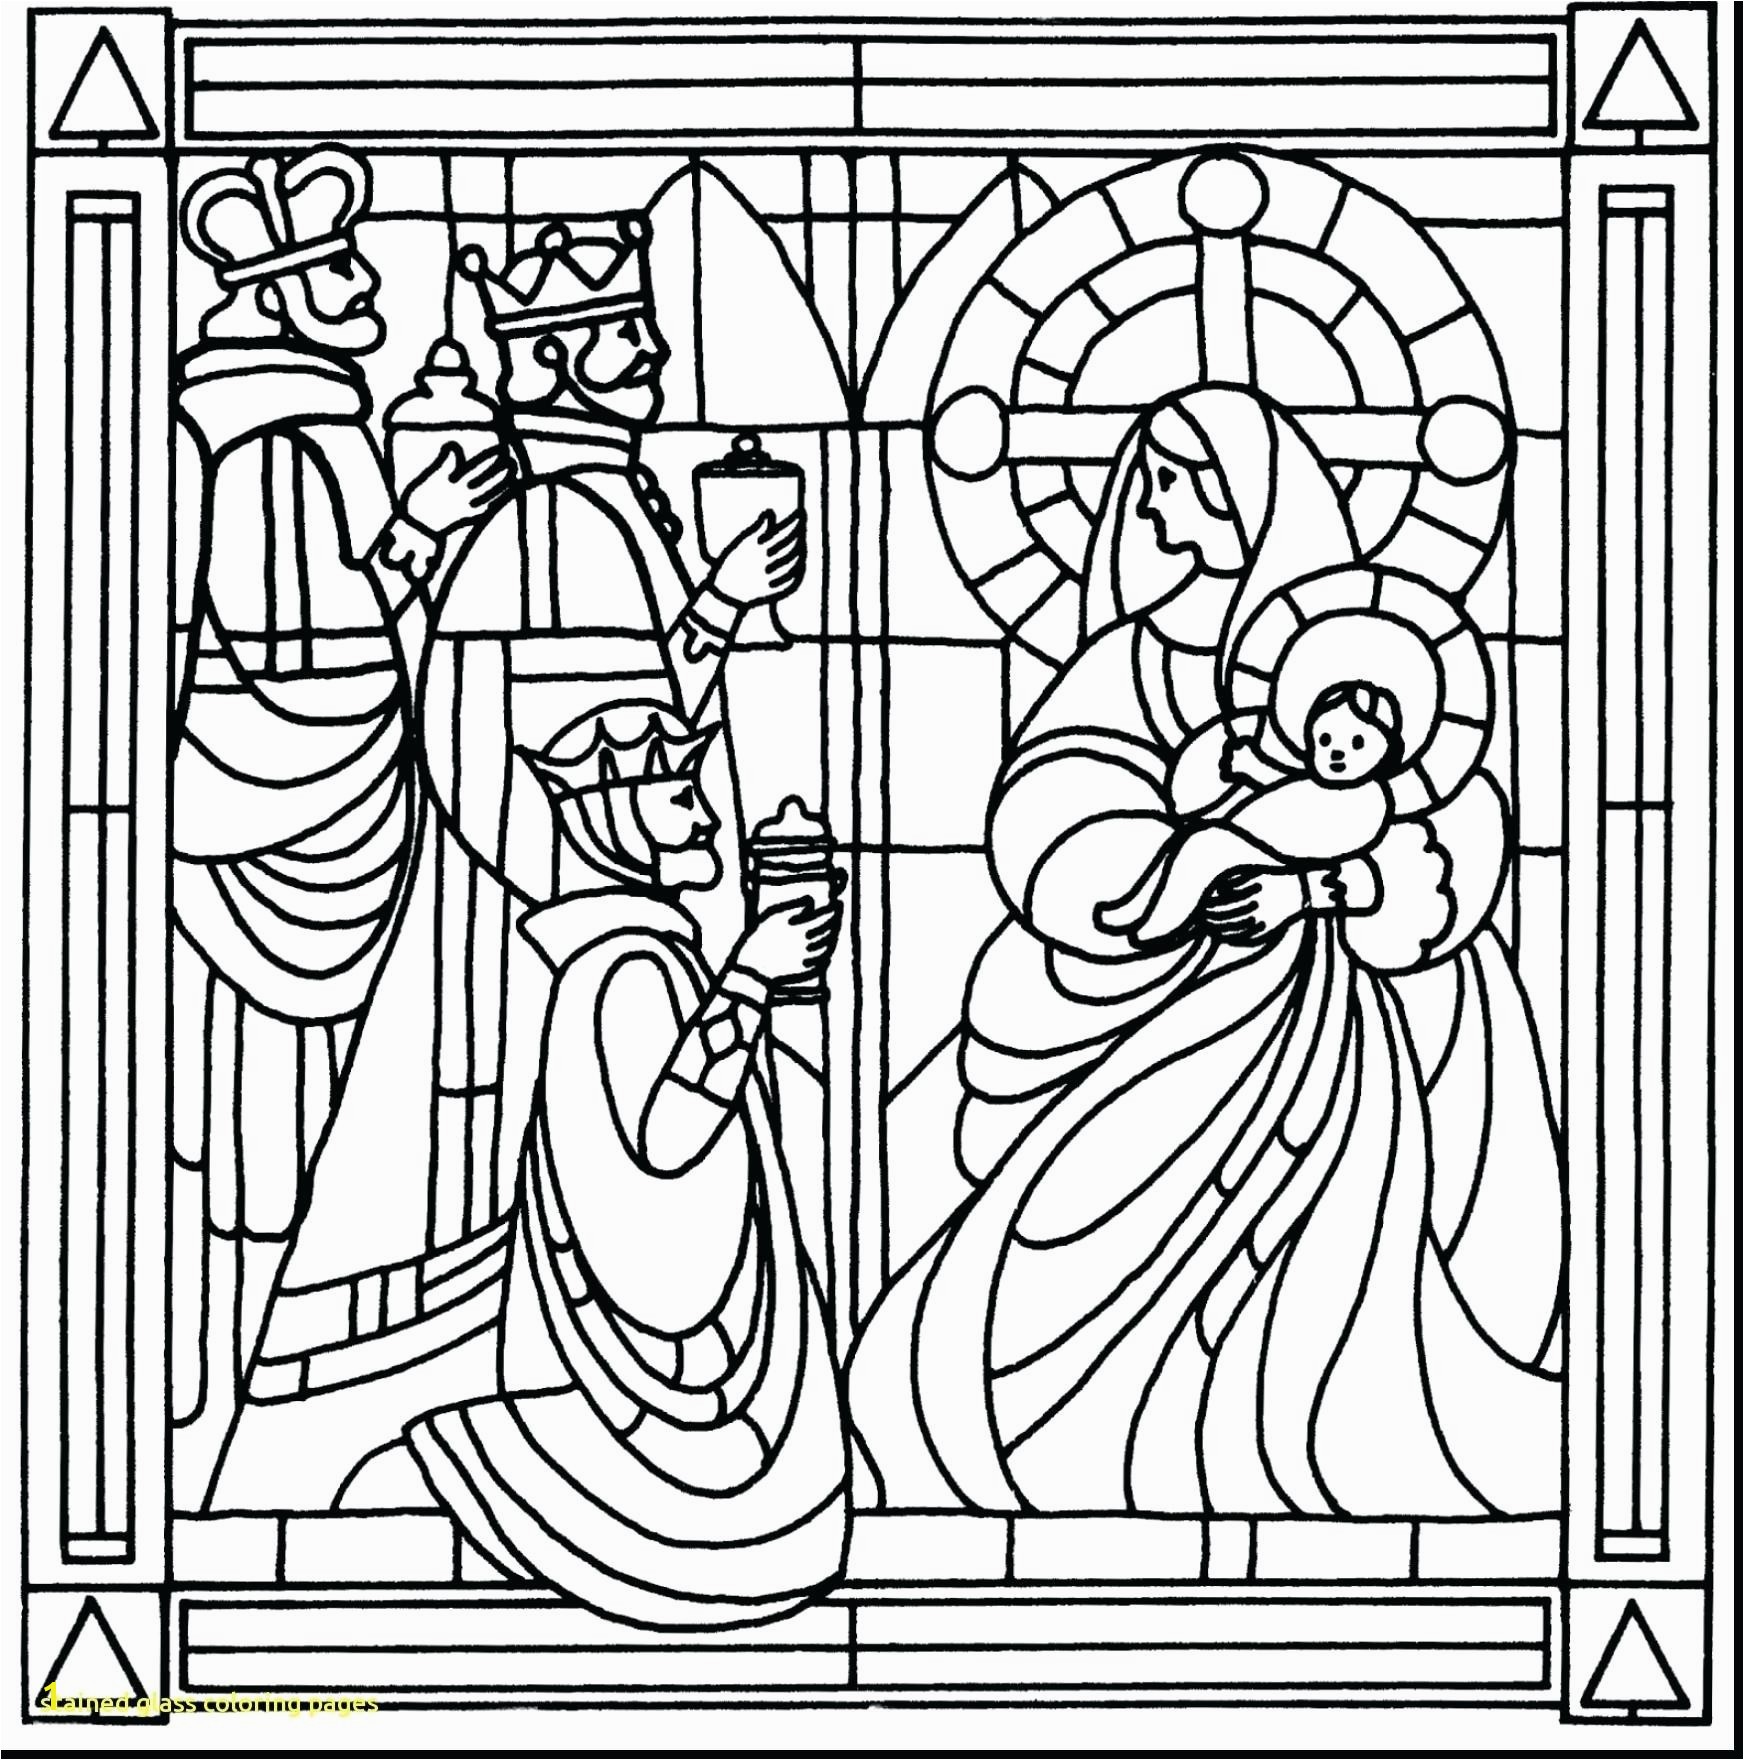 Beauty and the Beast Stained Glass Window Coloring Page Confidential Beauty and the Beast Stained Glass Window Coloring Page